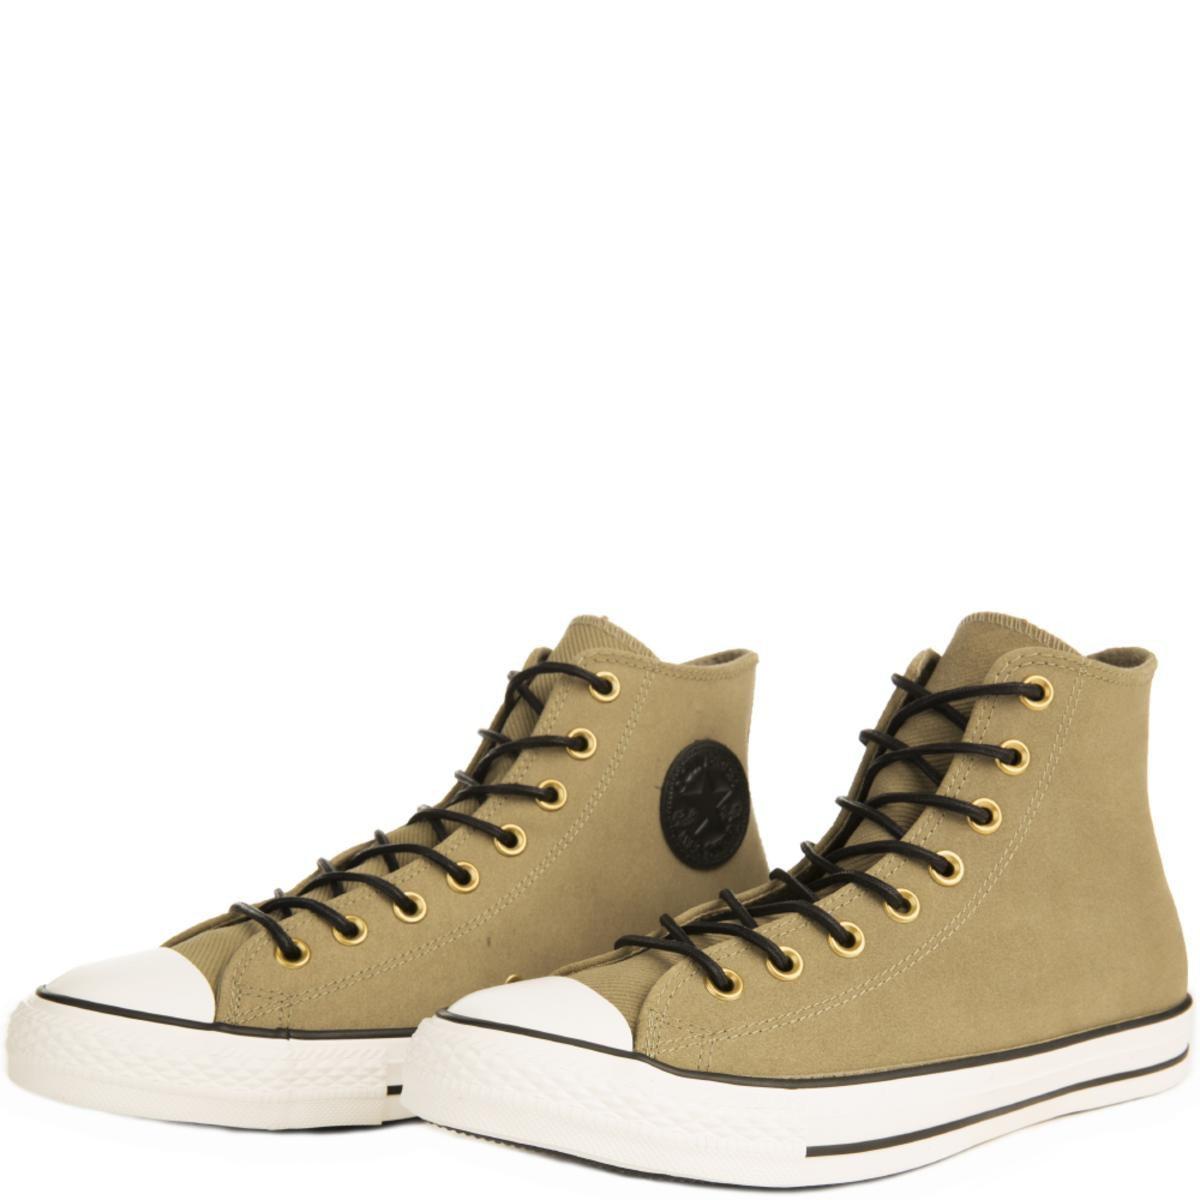 converse chuck taylor all star crafted suede high top